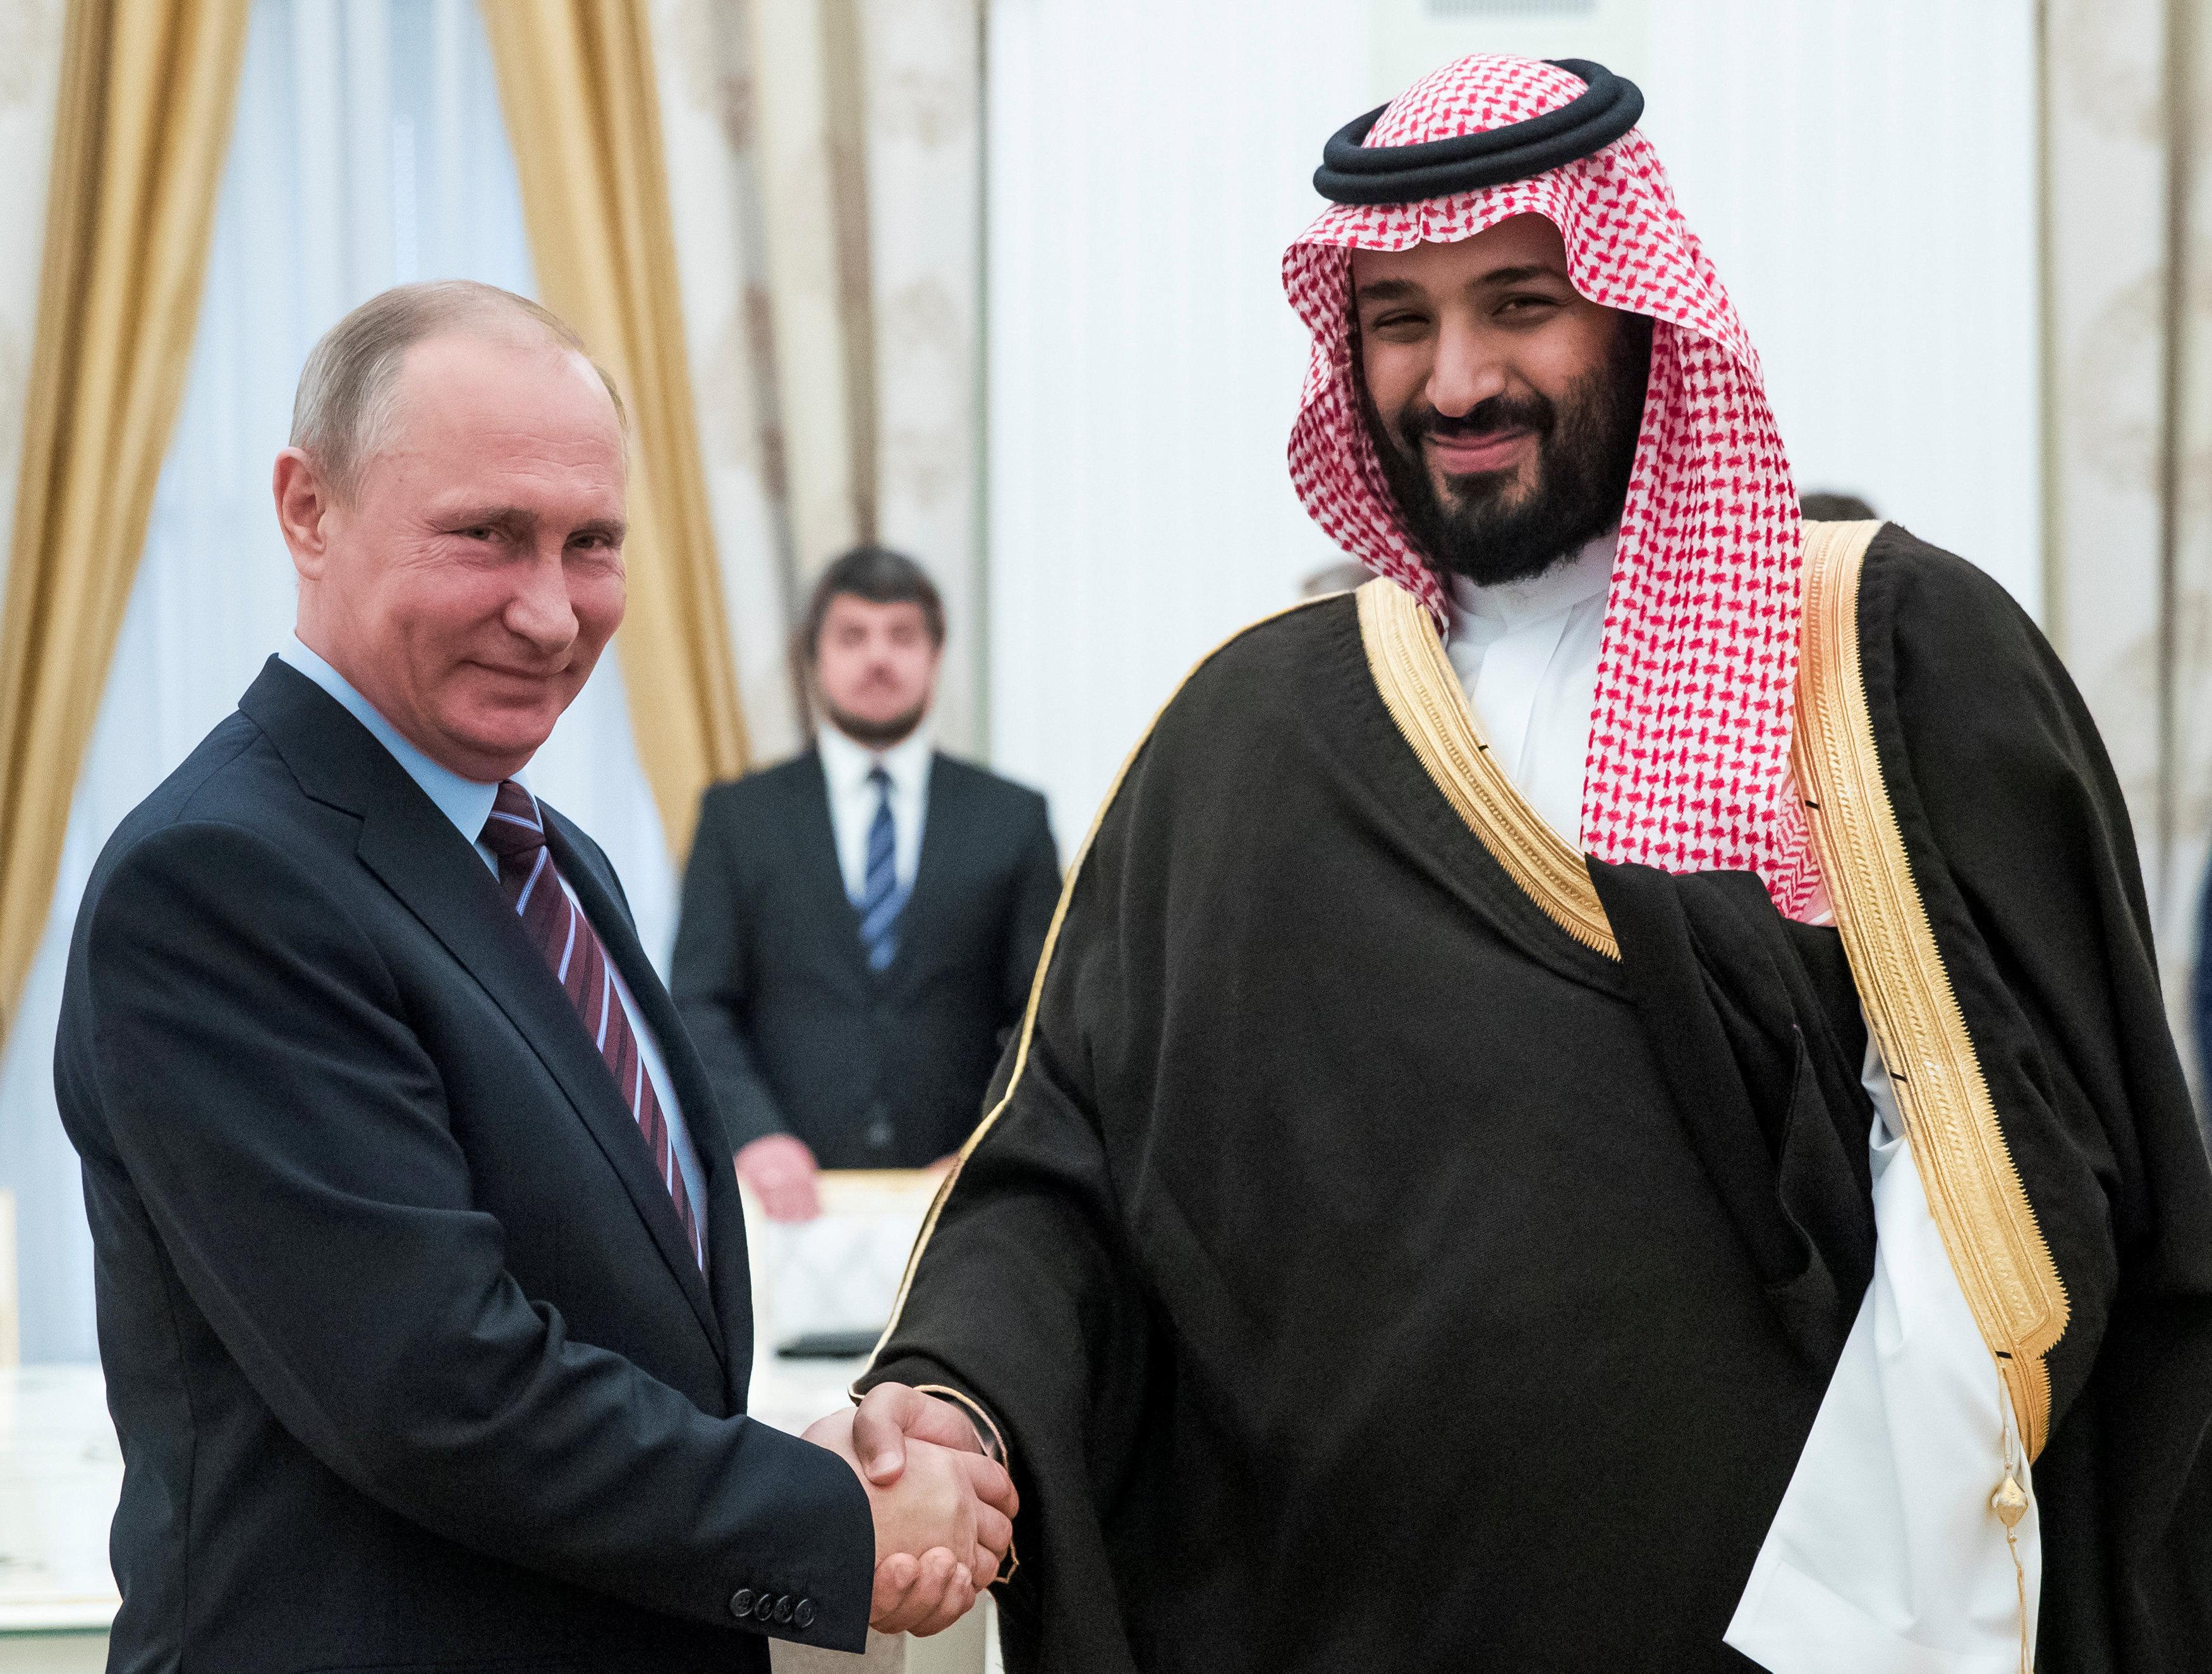 Russian President Vladimir Putin shakes hands with Saudi Deputy Crown Prince and Defence Minister Mohammed bin Salman during a meeting at the Kremlin in Moscow, Russia, May 30, 2017. REUTERS/Pavel Golovkin/Pool/File Photo